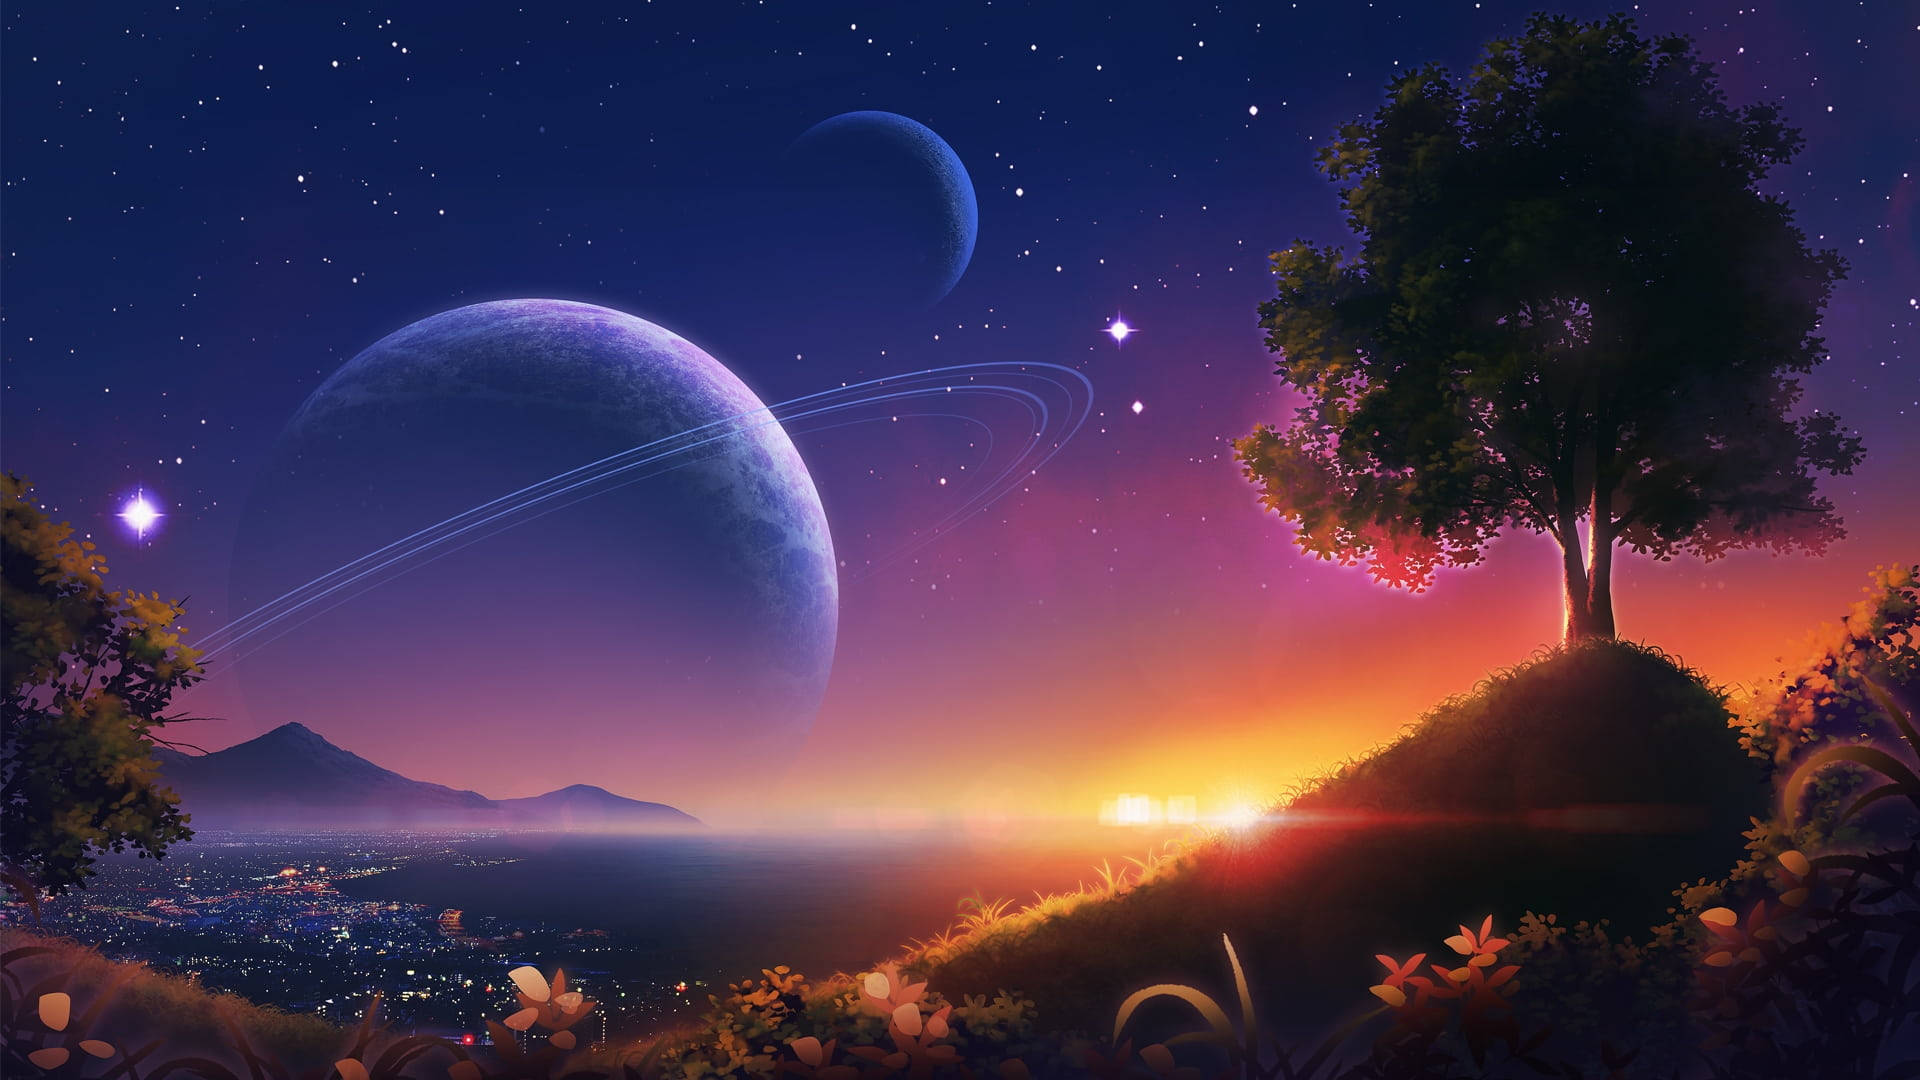 Illustration Of An Anime Girl At A Sci Fi Planet, Two Moons In Desert,  Manga Art 2 Stock Photo, Picture and Royalty Free Image. Image 192713885.